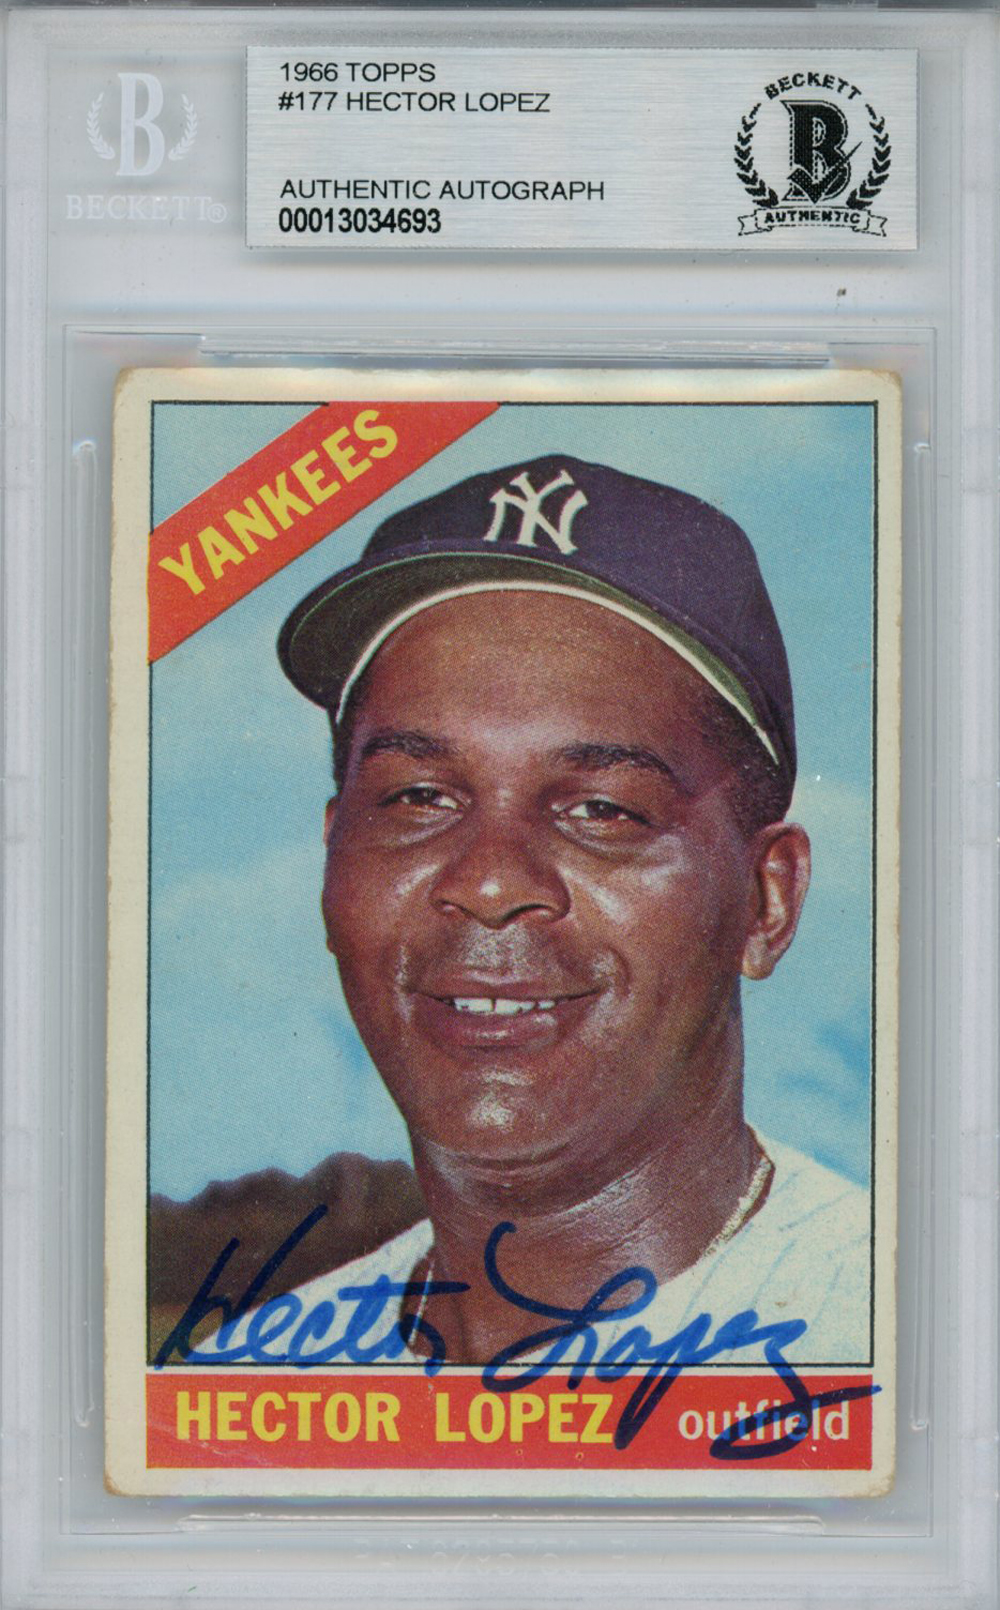 Hector Lopez Autographed 1966 Topps #177 Trading Card Beckett Slab